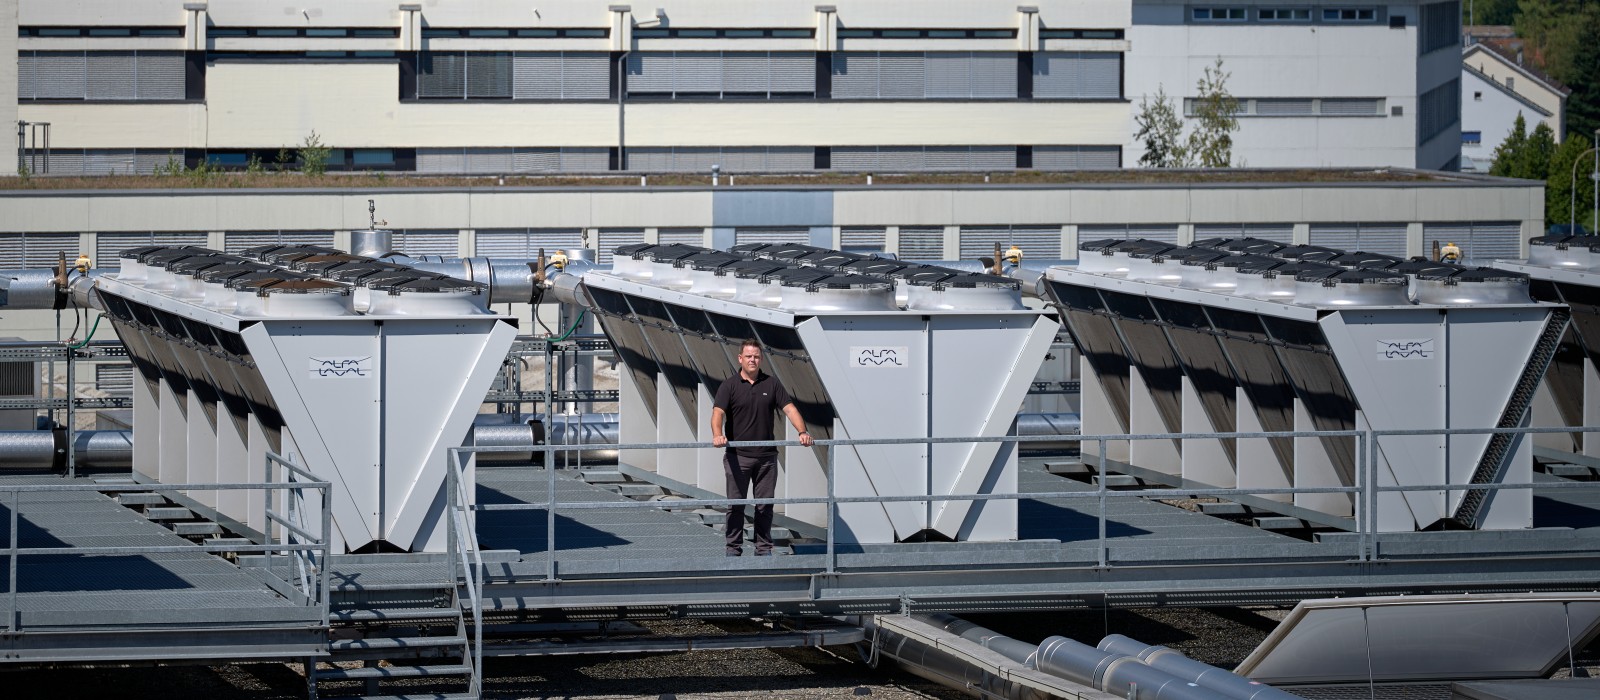 The ventilators on the roof of the Swiss plant in Rapperswil-Jona ensure energy-efficient heat/cold exchange.